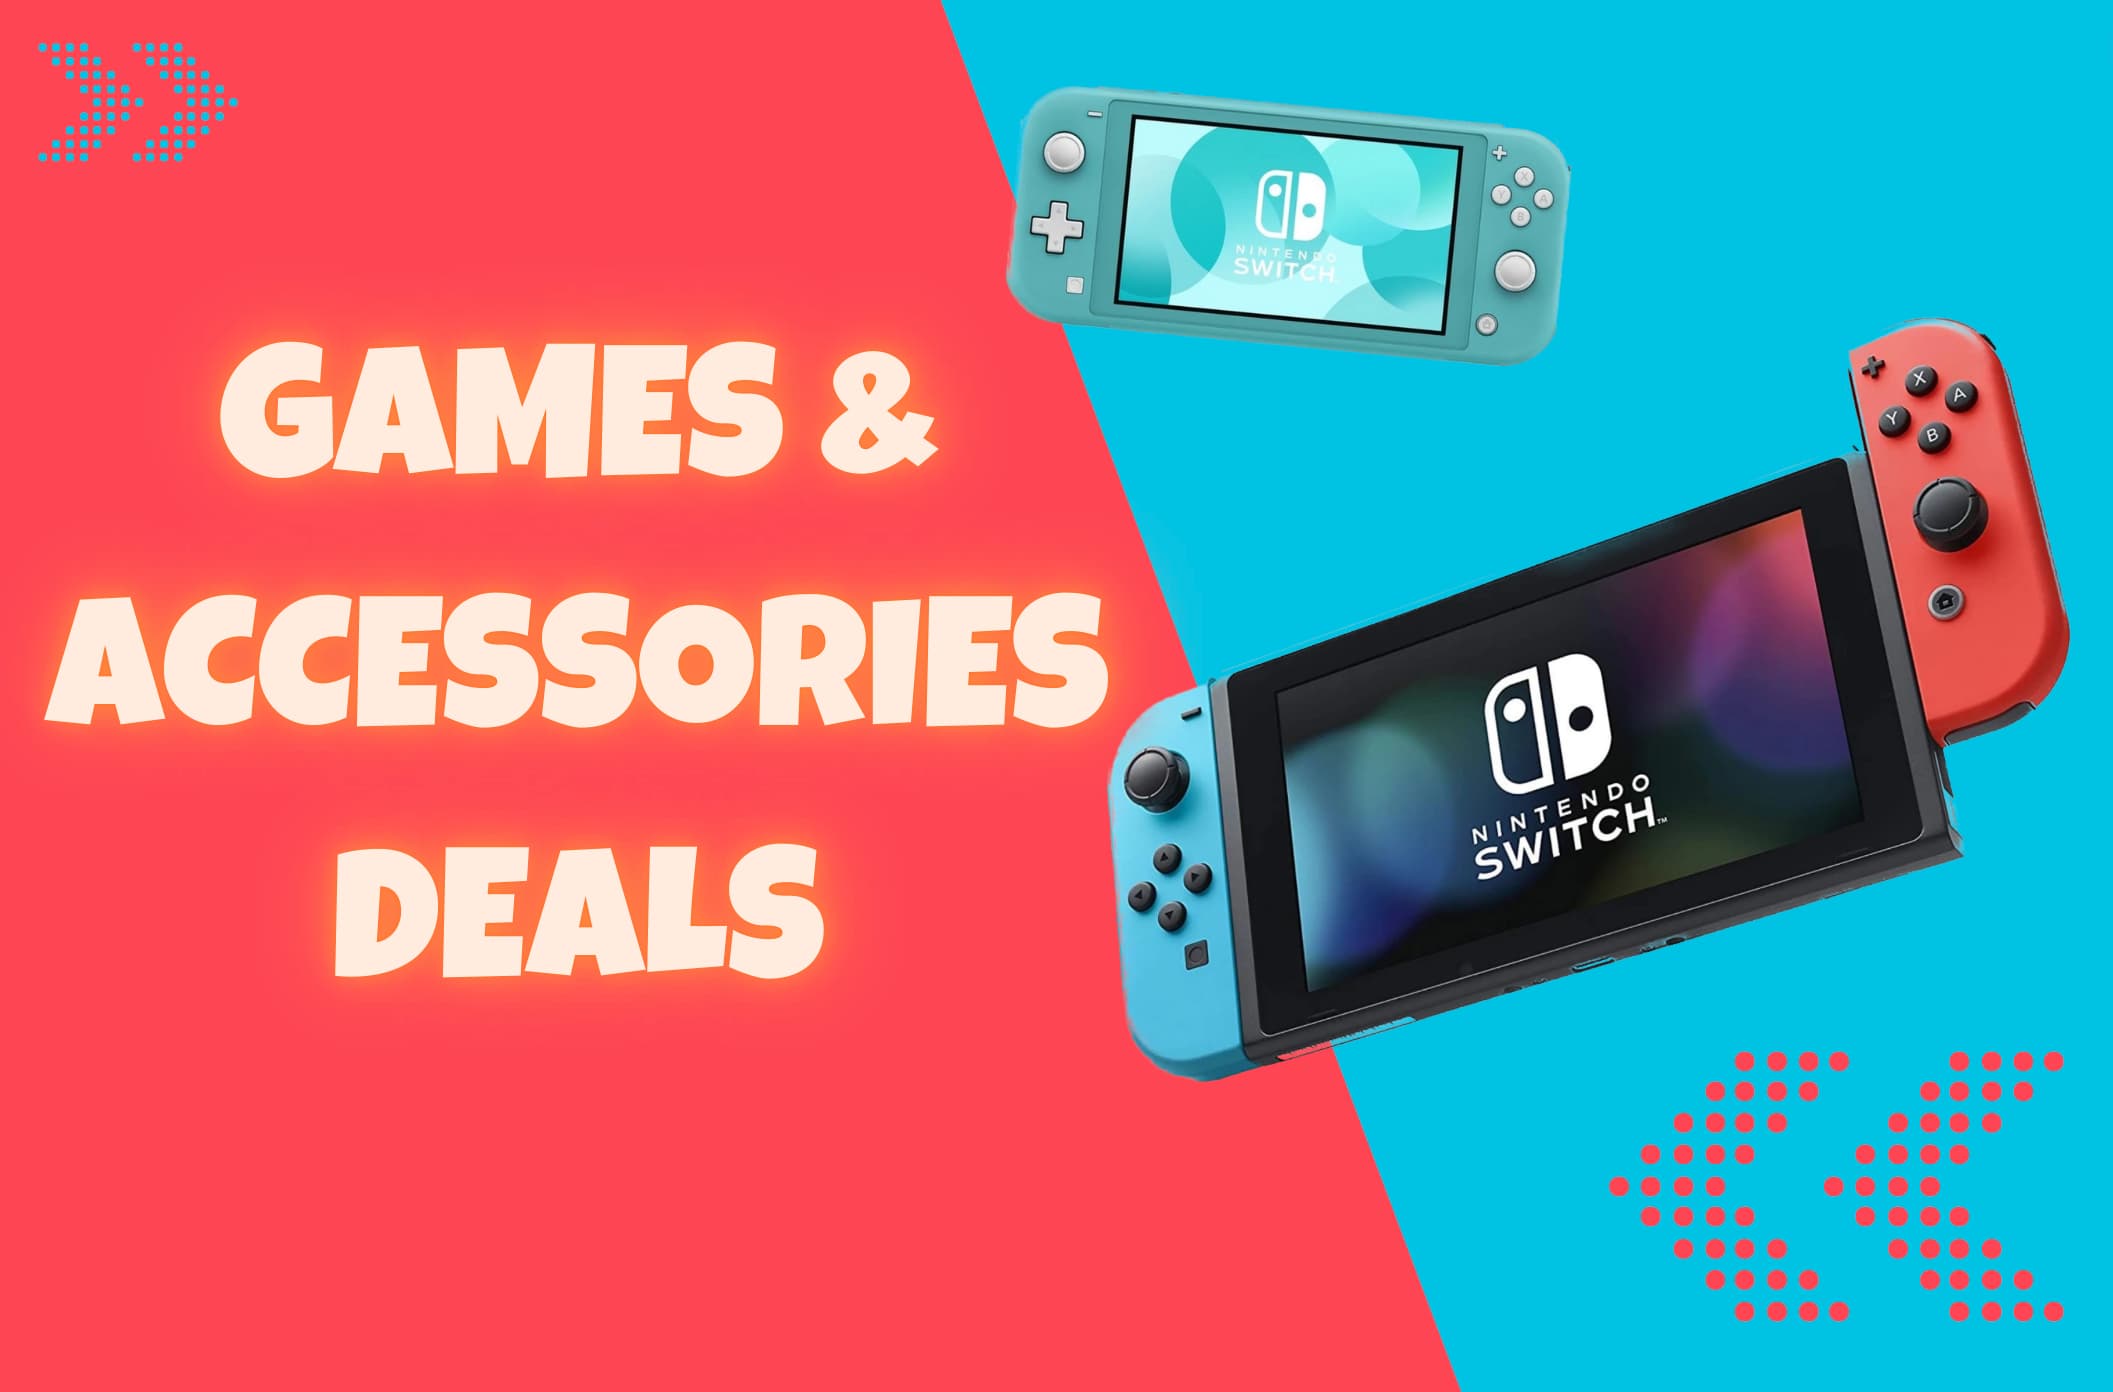 Don’t sleep on these Nintendo Switch game & accessory deals